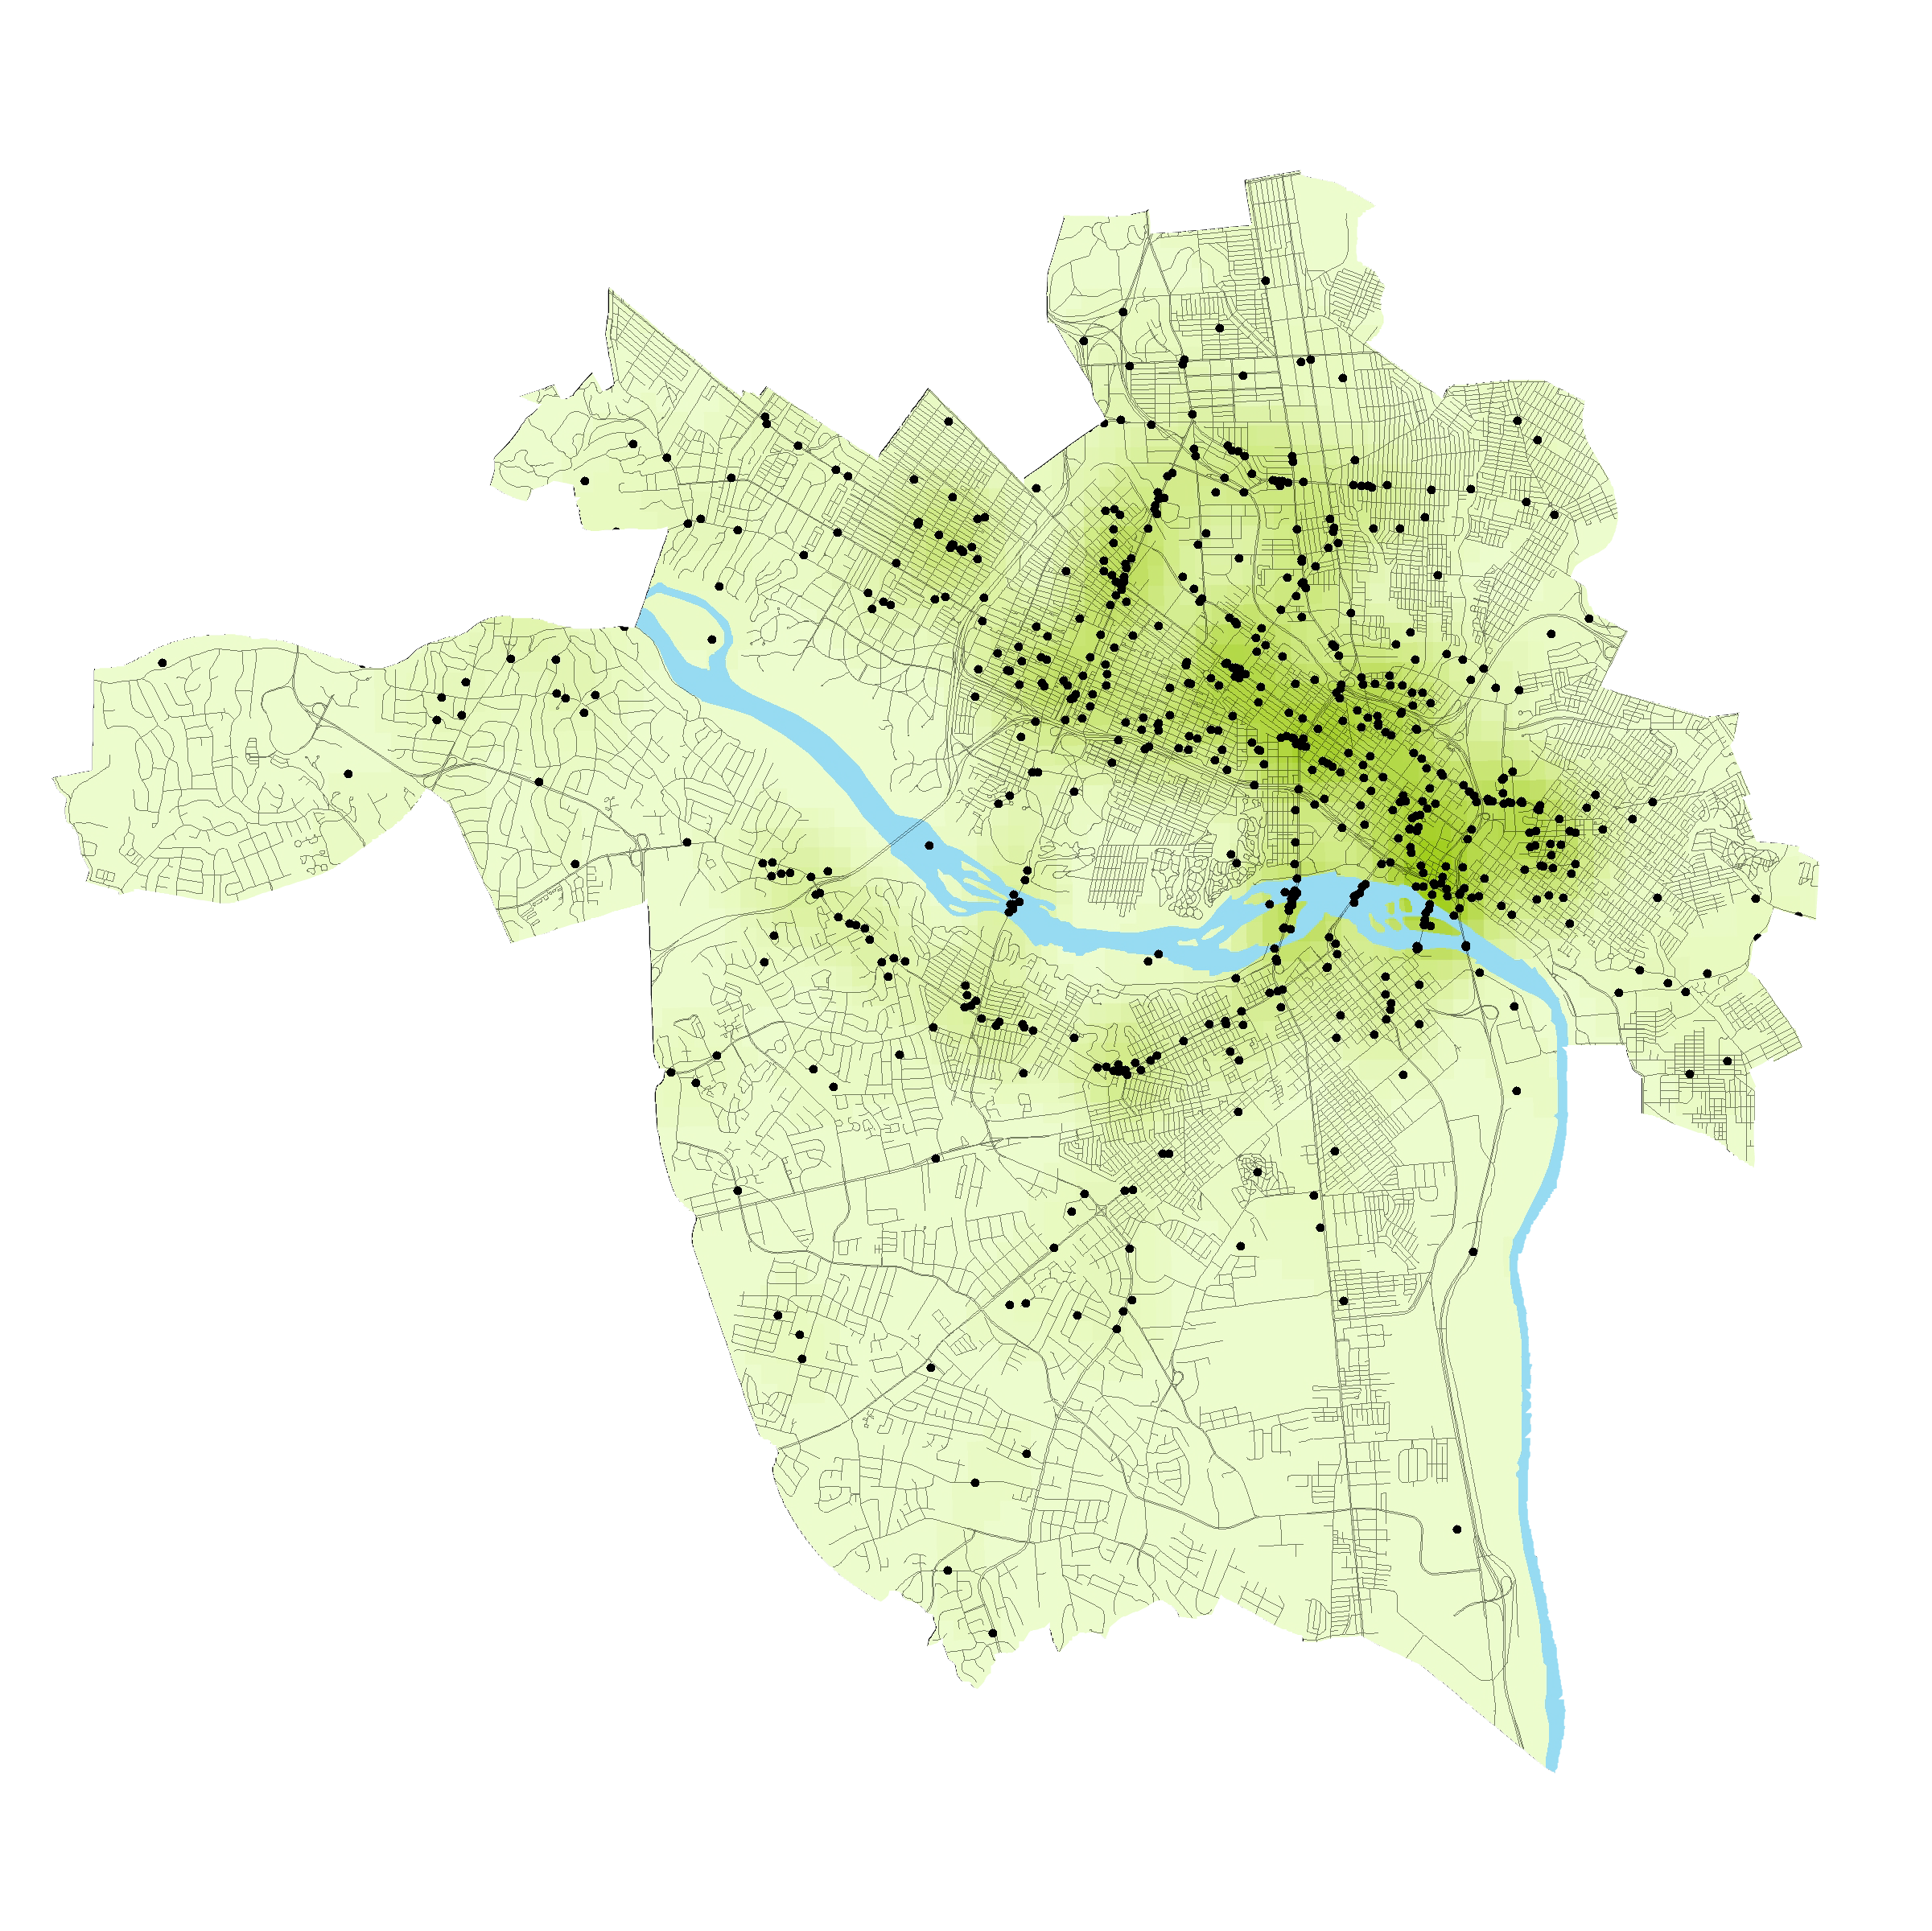 Green shaded map of Richmond showing bicyclists' barriers